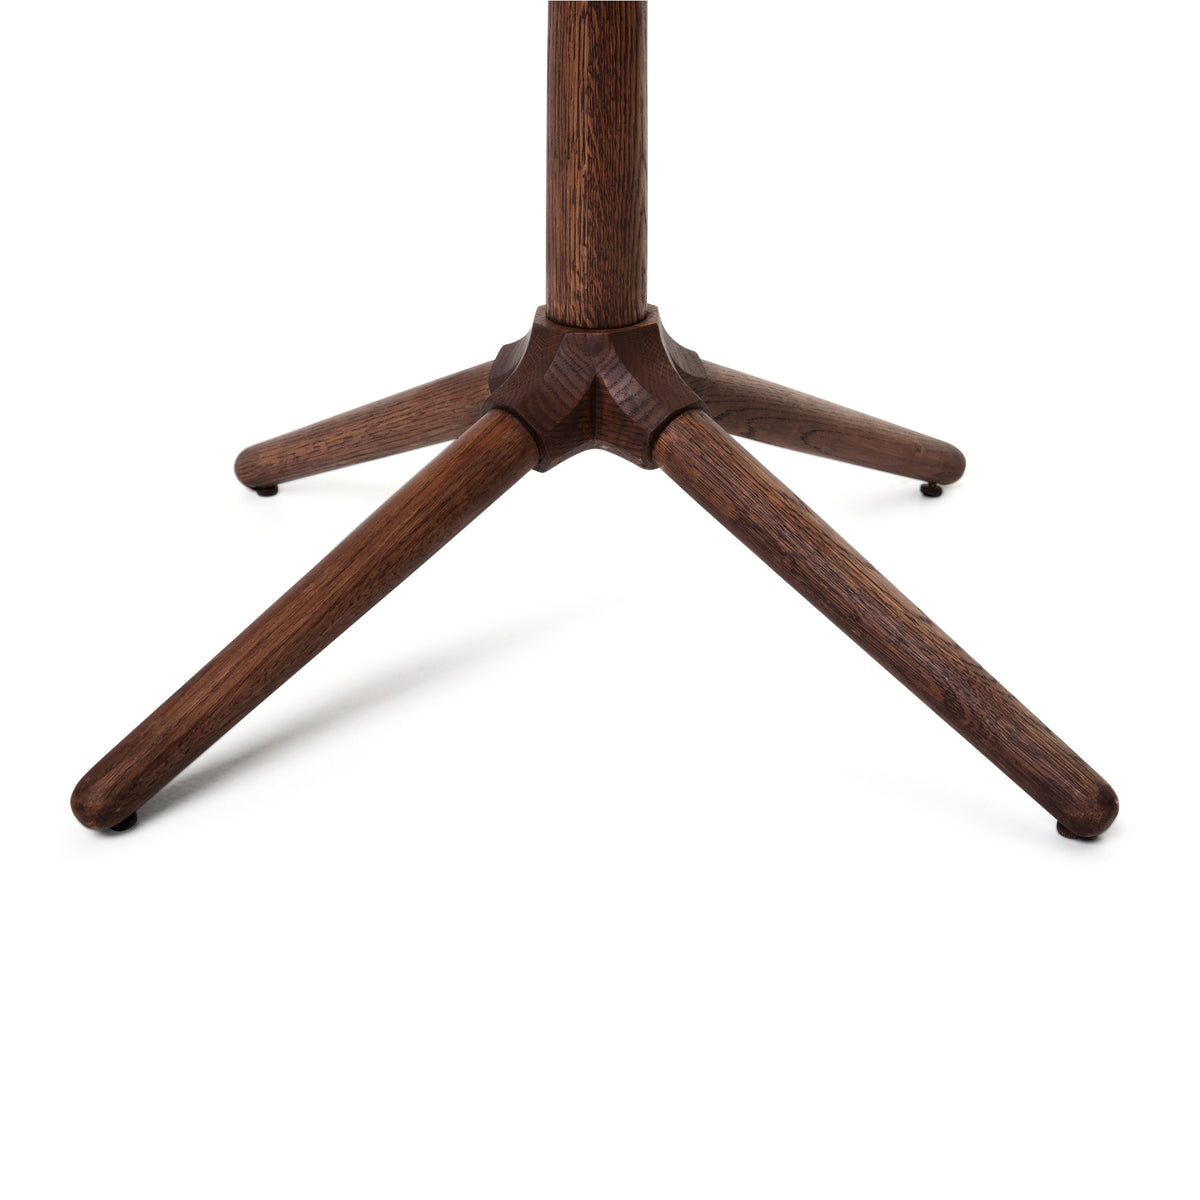 Pedestal Base Table - Round by Houtlander - Always Welcome Store